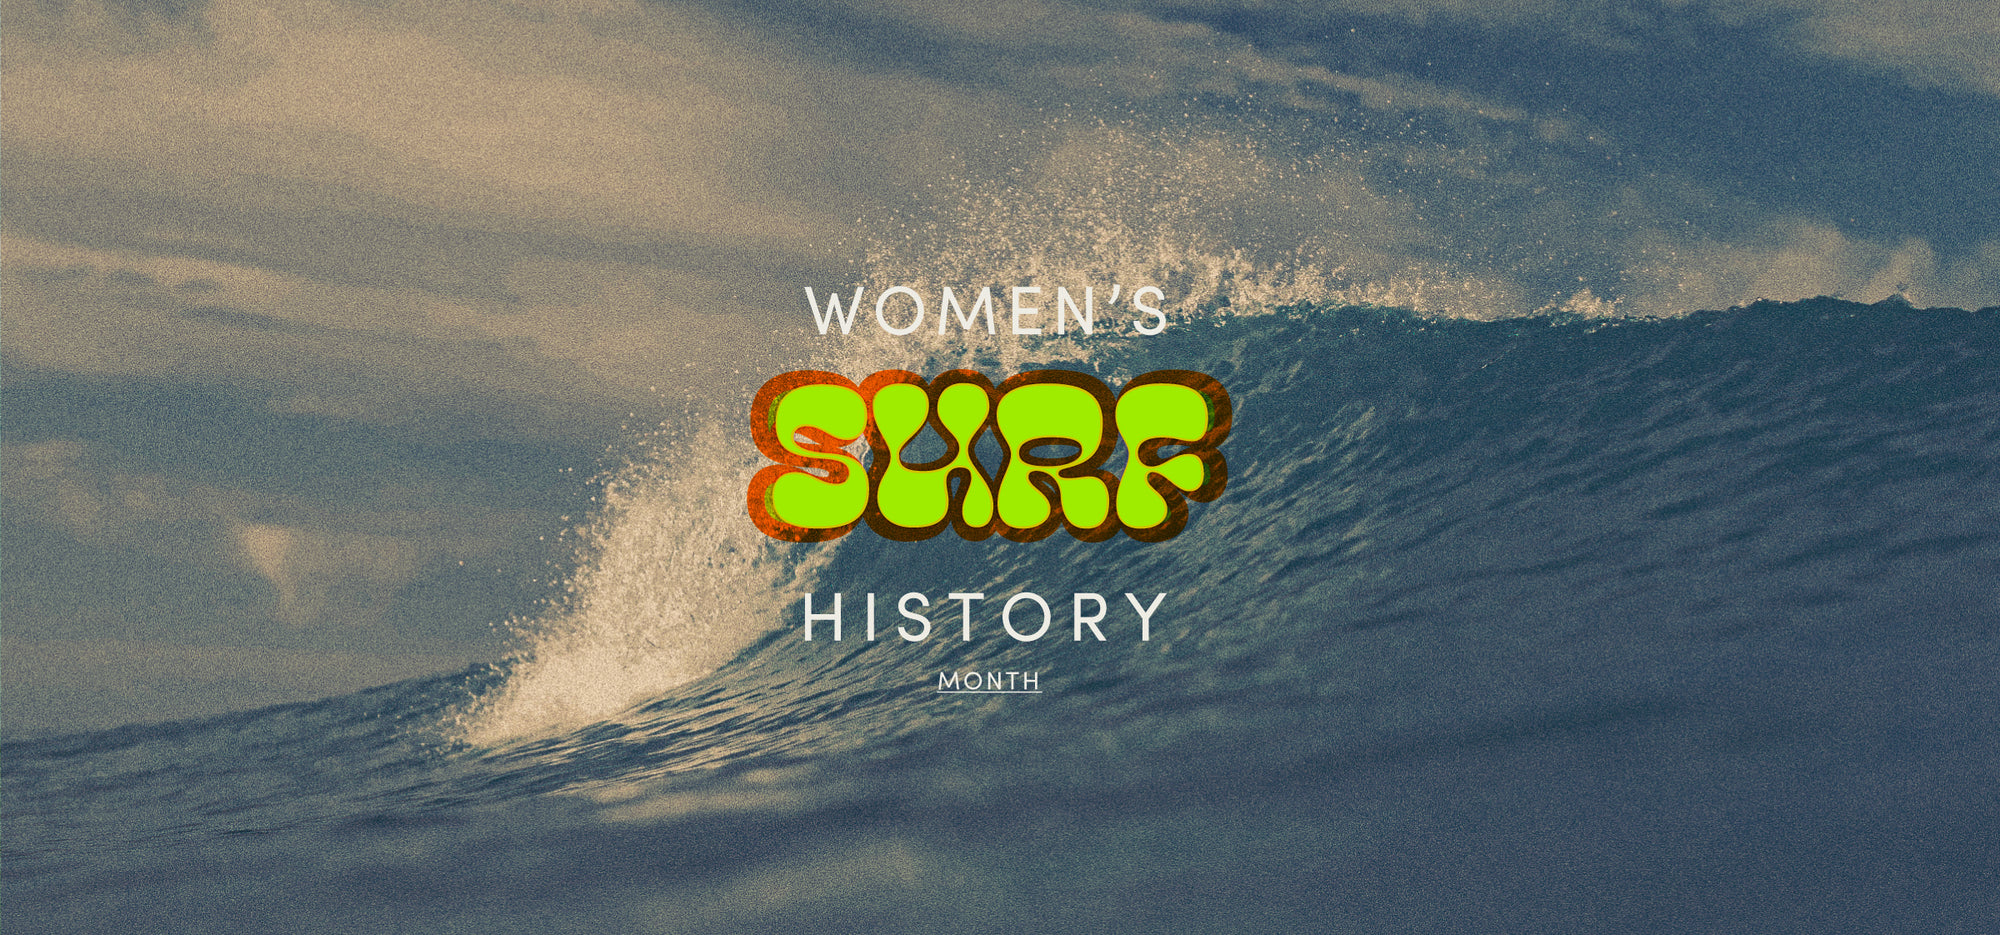 Women's [Surf] History Month